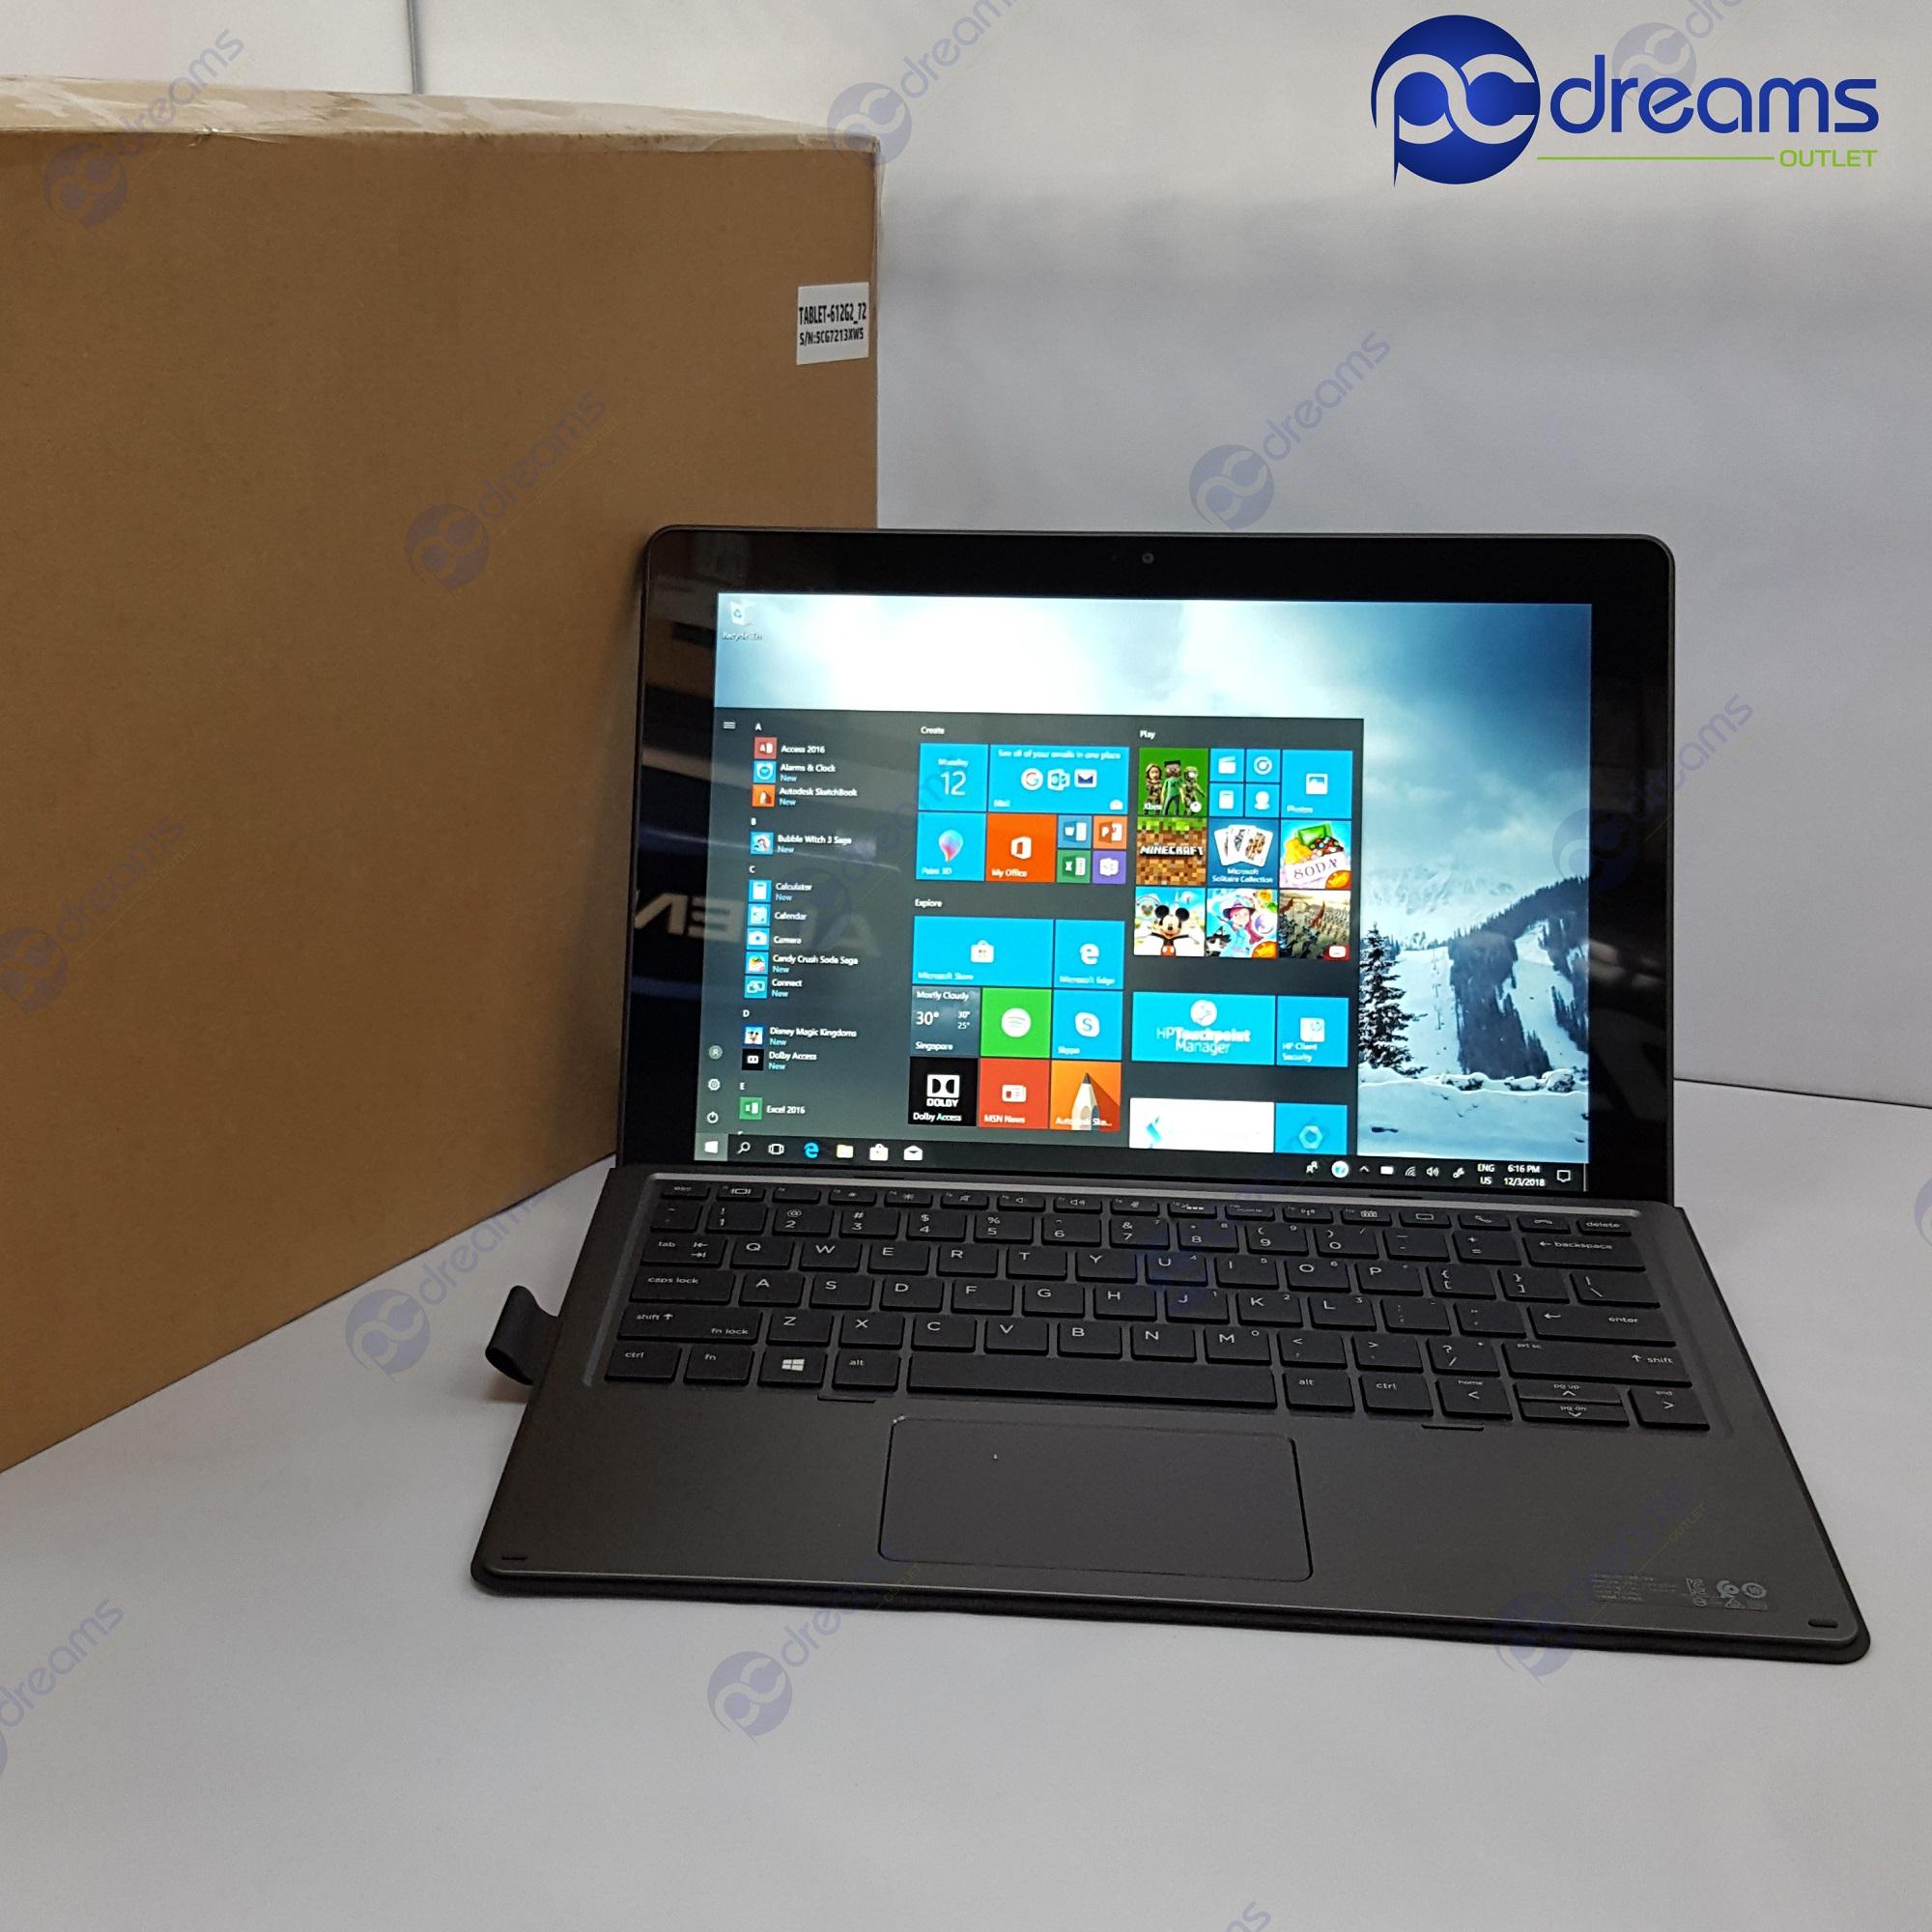 COMEX 2018! HP PRO X2 612 G2 (1ZD70AV) i5-7Y57/8GB/256GB PICe NVMe SSD [Premium Refreshed]